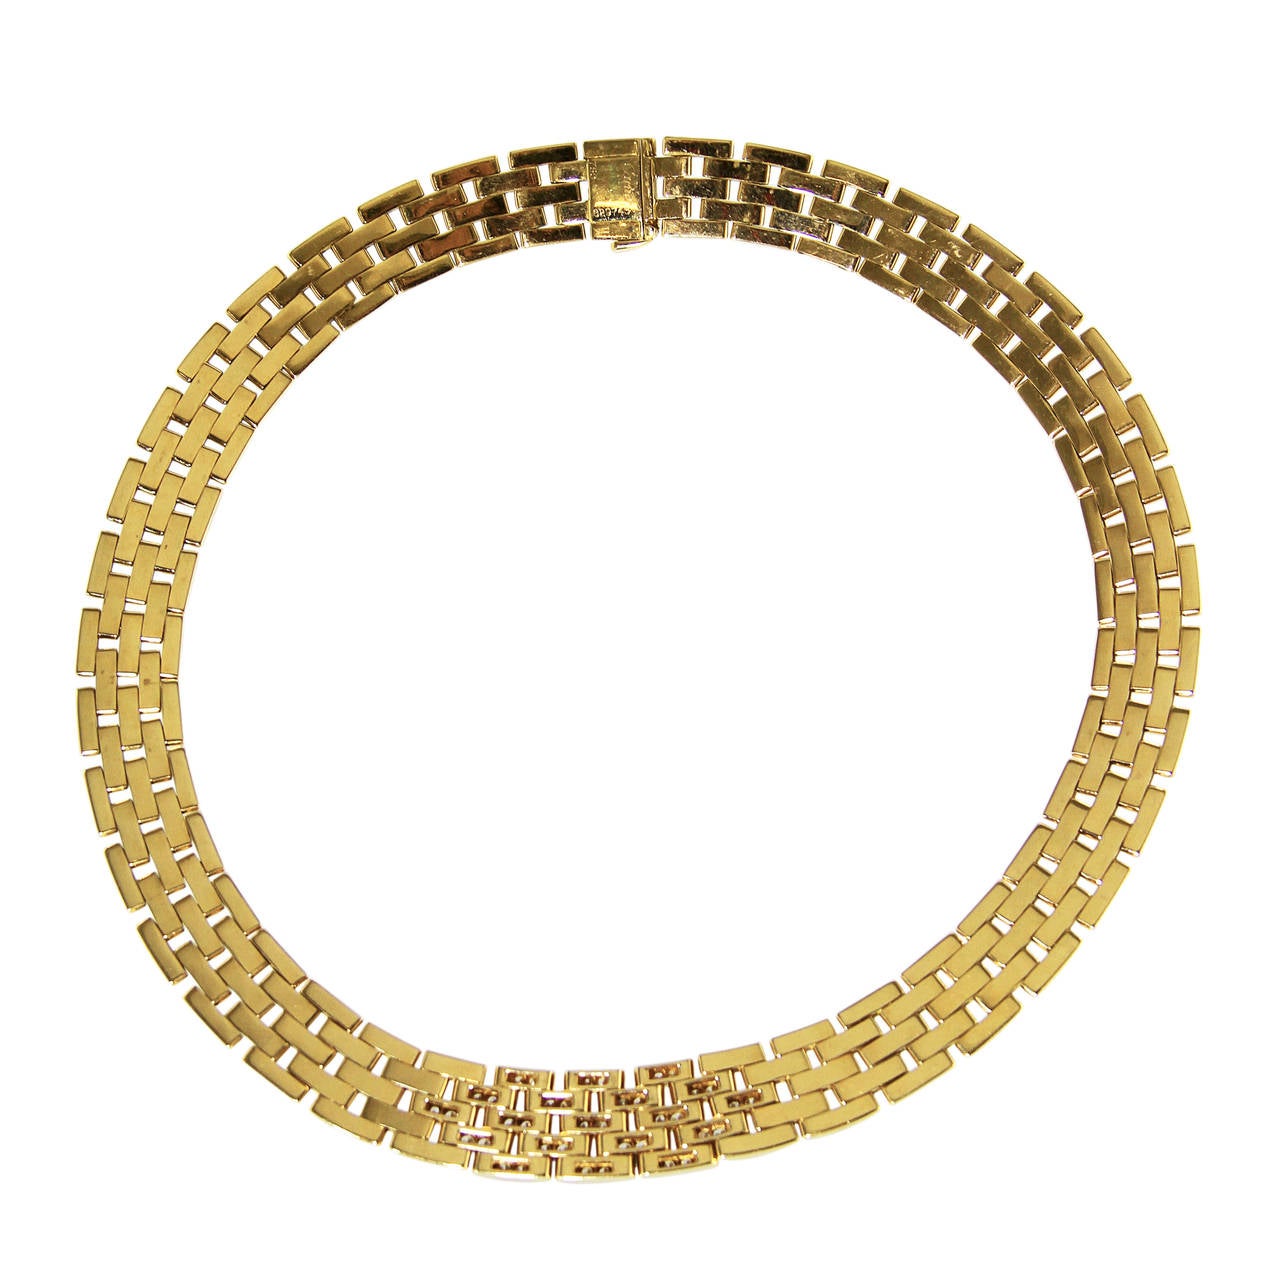 An 18 karat yellow gold and diamond 'Panthere' necklace by Cartier, the wide flexible strap designed as interlocking polished gold links set at the front with 76 round diamonds weighing approximately 1.50 carats, gross weight 139.7 grams, length 16